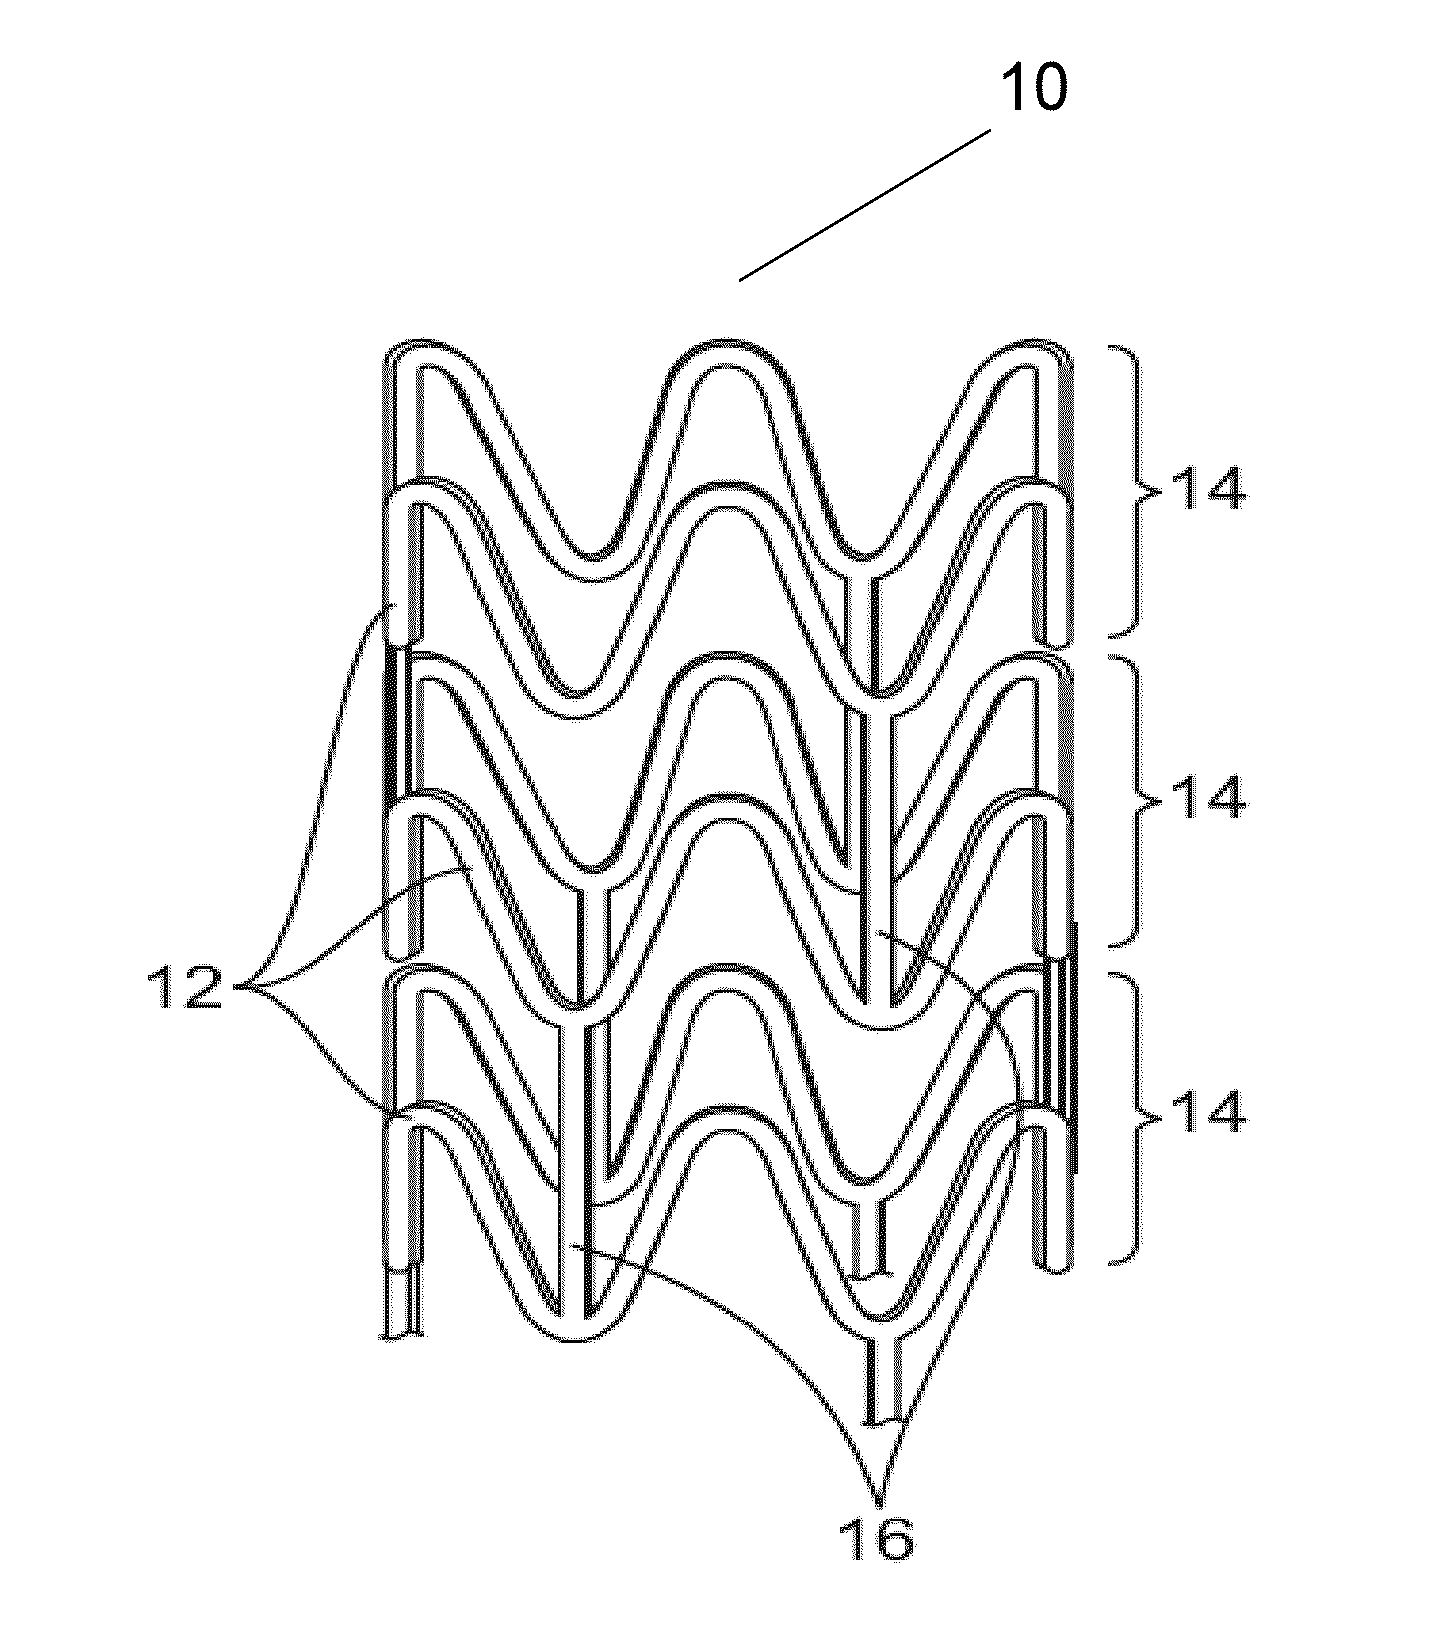 Short pulse laser machining of polymers enhanced with light absorbers for fabricating medical devices